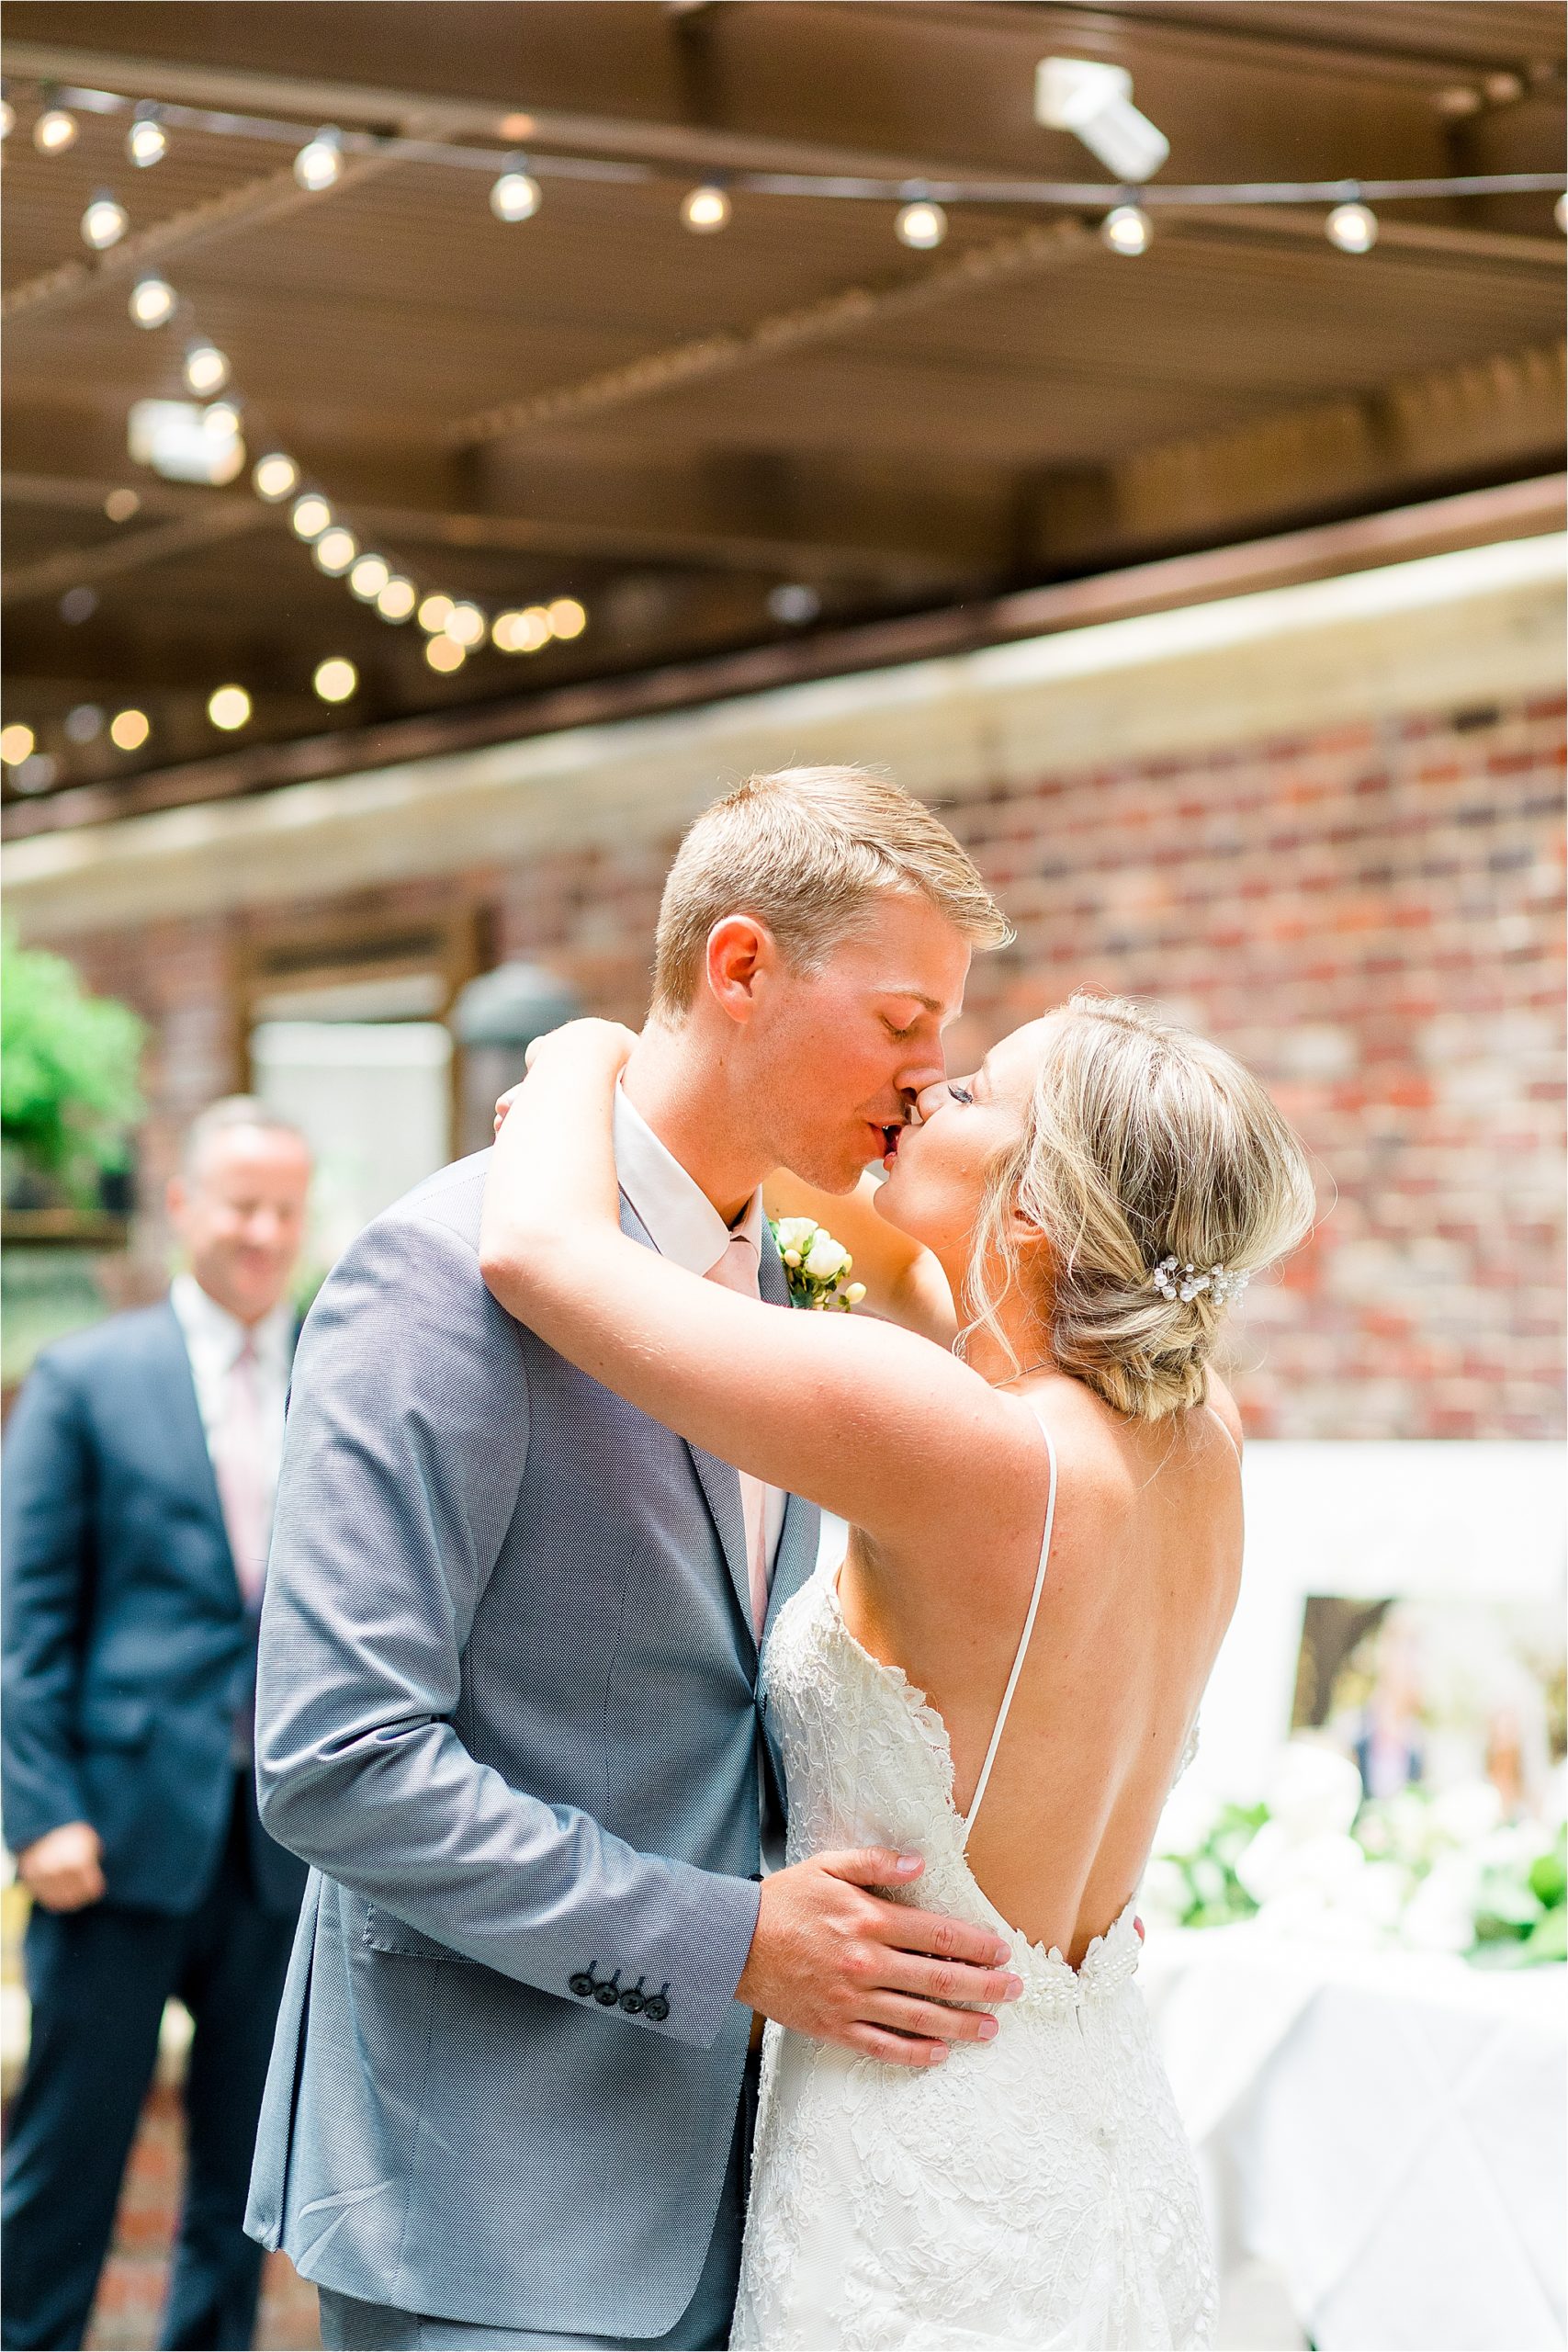 A happy newlywed couple share a kiss at their garden reception at III Forks Dallas 